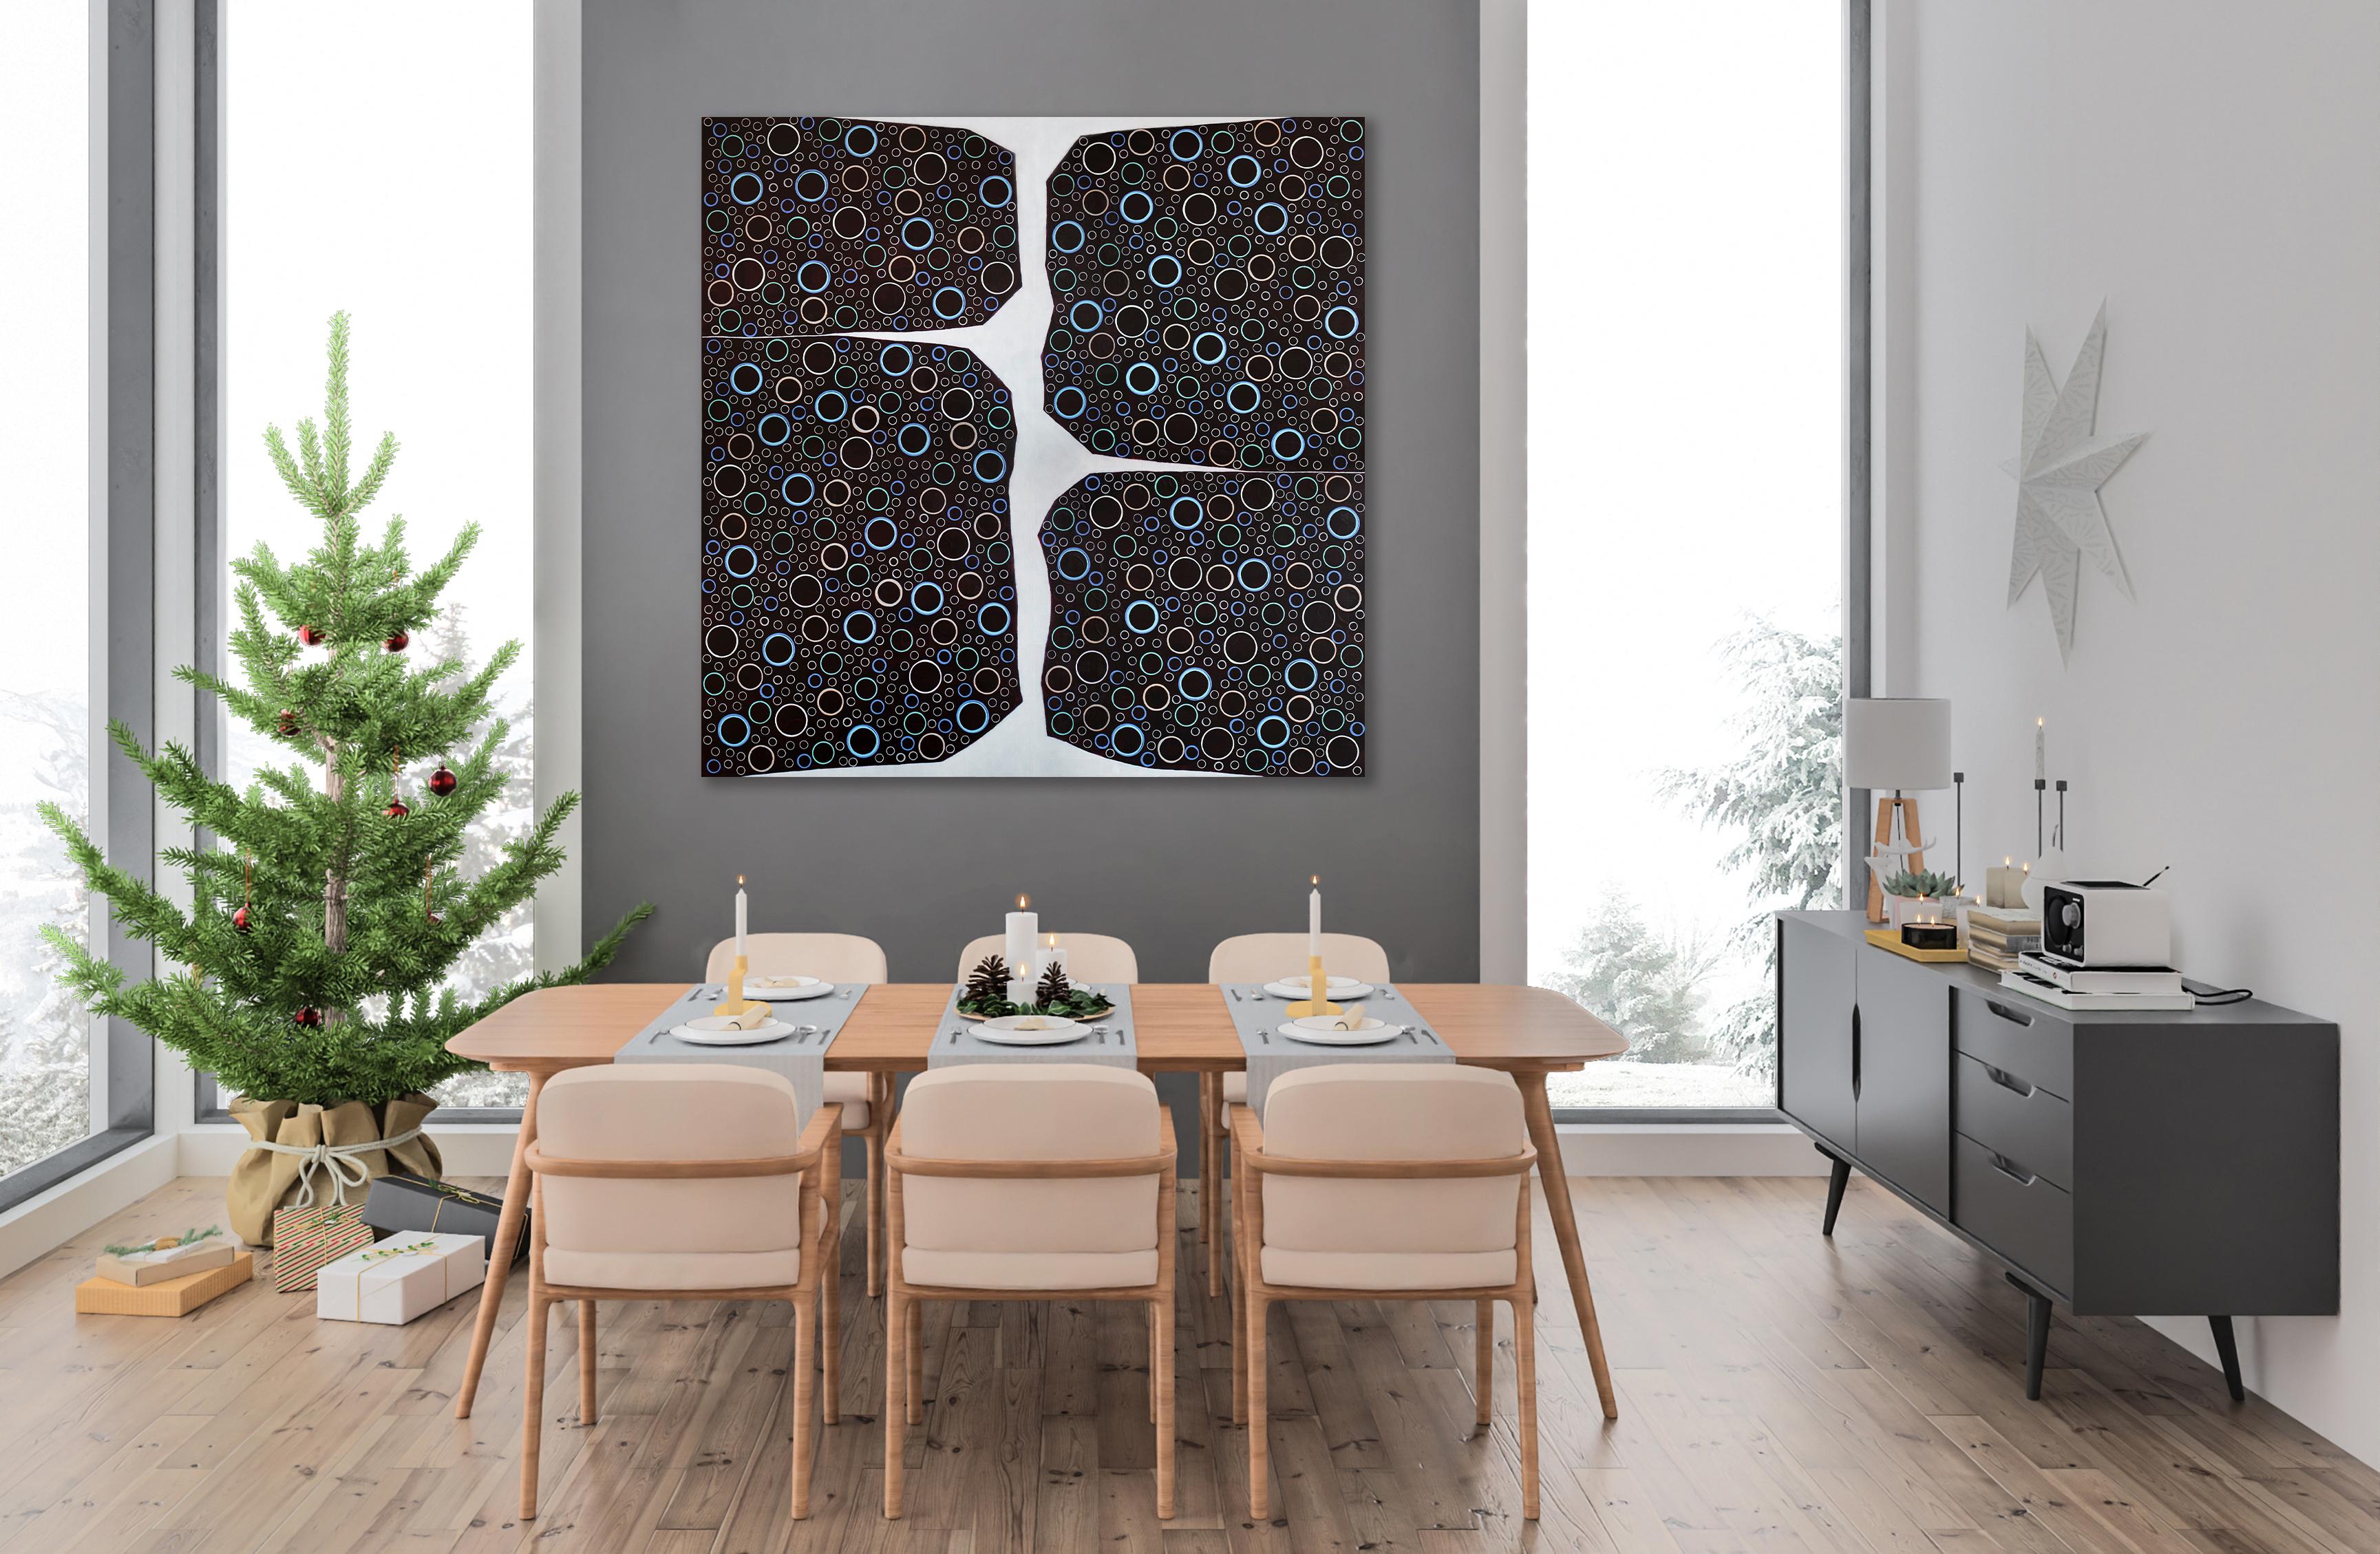 This large-scale original painting by Sofie Swann is made with acrylic paint on canvas. A square format, it features dark shapes, each composed of two parts, that emerge from either side of the canvas and nearly meet in the middle, leaving a